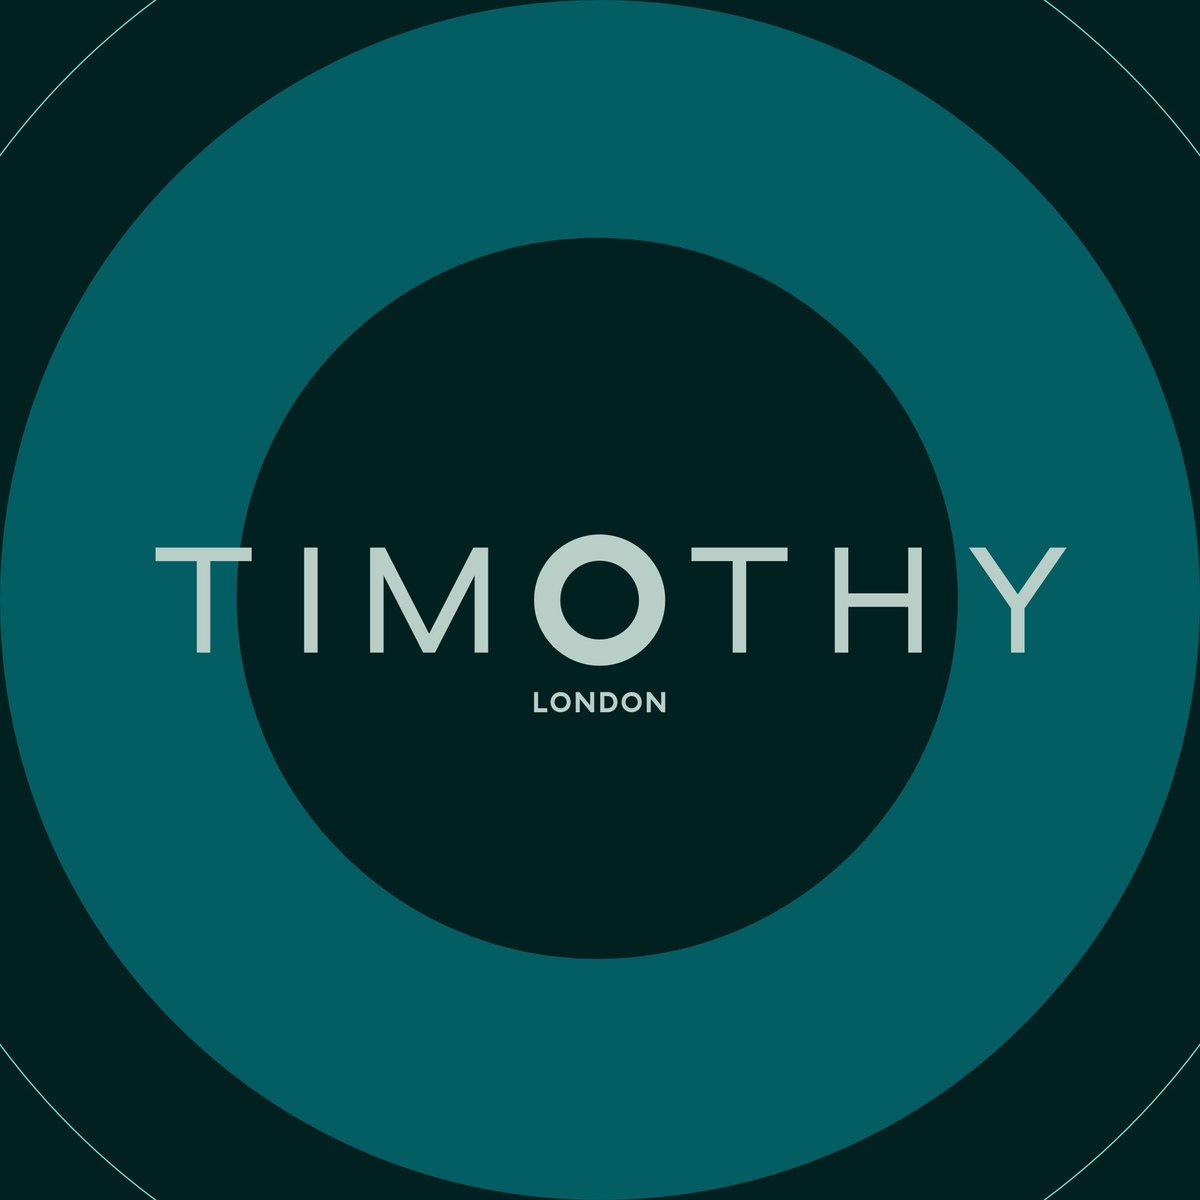 Say hello to Timothy, a British brand of premium travel goods, born of superior design and engineering excellence. 

#Timothy #TimothyLondon #TimothyTravel #Travelcompanion #bristishengineered #luggaged #brandlaunch #london #premiumtravelgoods #traveljourney